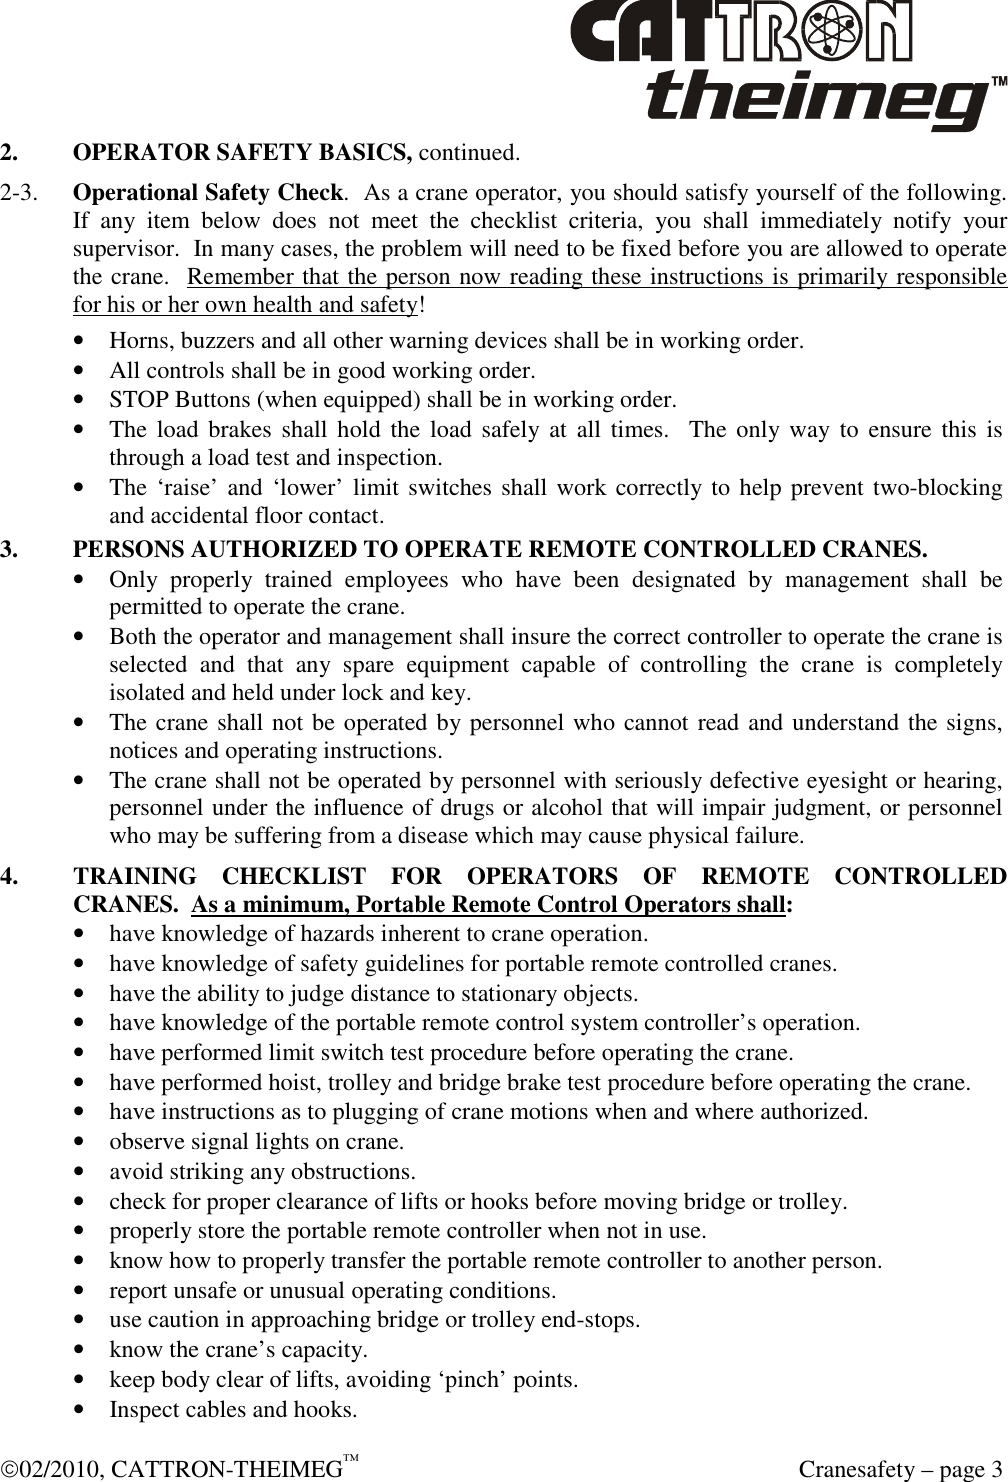  02/2010, CATTRON-THEIMEG™   Cranesafety – page 3 2.  OPERATOR SAFETY BASICS, continued.   2-3.  Operational Safety Check.  As a crane operator, you should satisfy yourself of the following.  If  any  item  below  does  not  meet  the  checklist  criteria,  you  shall  immediately  notify  your supervisor.  In many cases, the problem will need to be fixed before you are allowed to operate the crane.  Remember that the person now reading these instructions is primarily responsible for his or her own health and safety! • Horns, buzzers and all other warning devices shall be in working order. • All controls shall be in good working order. • STOP Buttons (when equipped) shall be in working order.  • The load brakes  shall  hold  the  load safely  at  all times.    The  only way  to  ensure  this is through a load test and inspection. • The ‘raise’ and ‘lower’ limit switches shall work correctly to help prevent two-blocking and accidental floor contact.  3.  PERSONS AUTHORIZED TO OPERATE REMOTE CONTROLLED CRANES. • Only  properly  trained  employees  who  have  been  designated  by  management  shall  be permitted to operate the crane. • Both the operator and management shall insure the correct controller to operate the crane is selected  and  that  any  spare  equipment  capable  of  controlling  the  crane  is  completely isolated and held under lock and key. • The crane shall not be operated by personnel who cannot read and understand the signs, notices and operating instructions. • The crane shall not be operated by personnel with seriously defective eyesight or hearing, personnel under the influence of drugs or alcohol that will impair judgment, or personnel who may be suffering from a disease which may cause physical failure.   4.  TRAINING  CHECKLIST  FOR  OPERATORS  OF  REMOTE  CONTROLLED CRANES.  As a minimum, Portable Remote Control Operators shall: • have knowledge of hazards inherent to crane operation. • have knowledge of safety guidelines for portable remote controlled cranes. • have the ability to judge distance to stationary objects. • have knowledge of the portable remote control system controller’s operation. • have performed limit switch test procedure before operating the crane. • have performed hoist, trolley and bridge brake test procedure before operating the crane. • have instructions as to plugging of crane motions when and where authorized. • observe signal lights on crane. • avoid striking any obstructions. • check for proper clearance of lifts or hooks before moving bridge or trolley. • properly store the portable remote controller when not in use. • know how to properly transfer the portable remote controller to another person. • report unsafe or unusual operating conditions. • use caution in approaching bridge or trolley end-stops. • know the crane’s capacity. • keep body clear of lifts, avoiding ‘pinch’ points. • Inspect cables and hooks. 